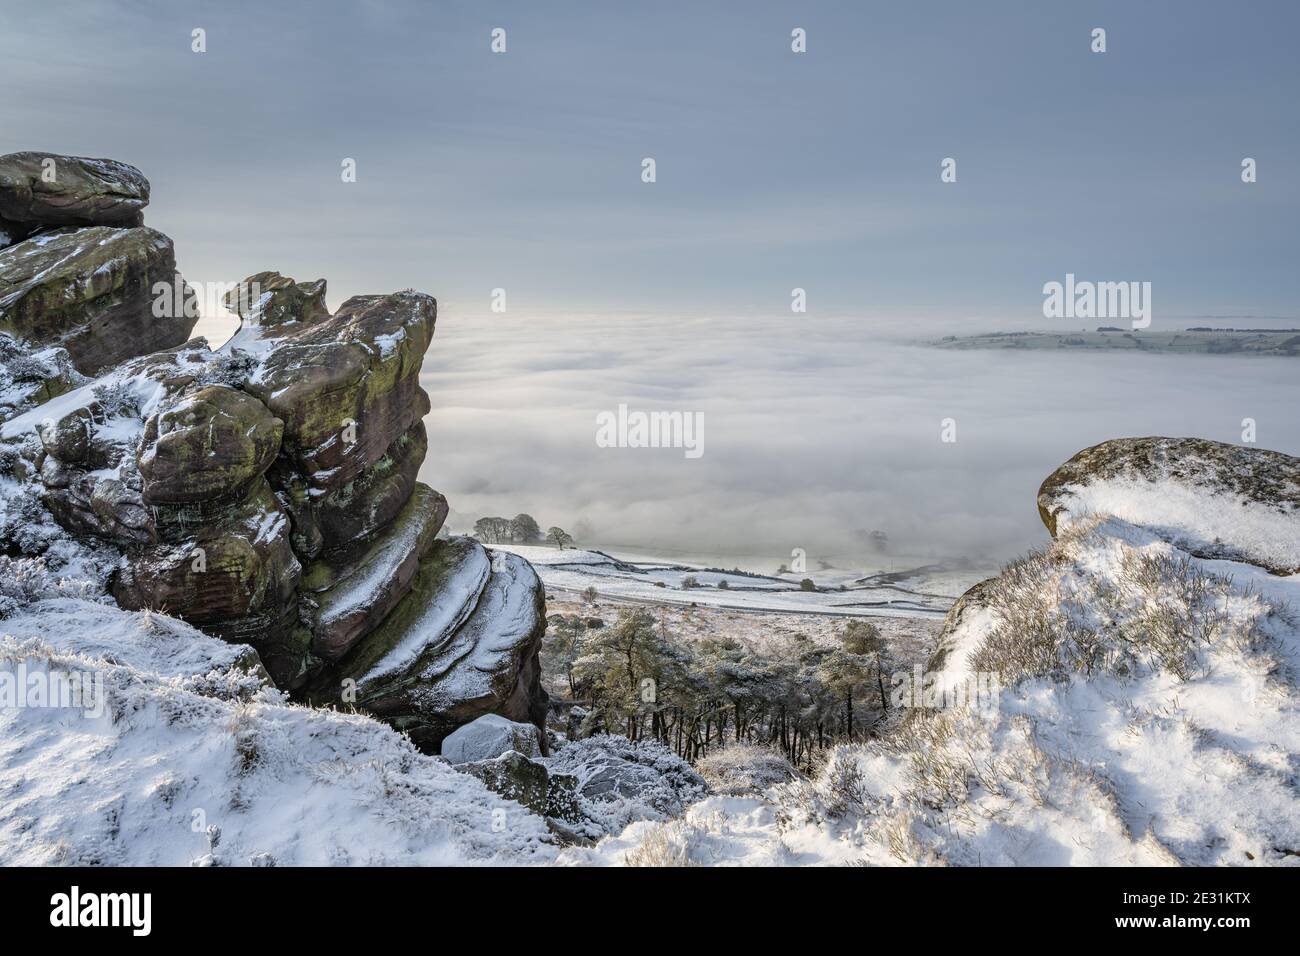 Sunrise temperature inversion at The Roaches during winter in the Peak District National Park. Stock Photo